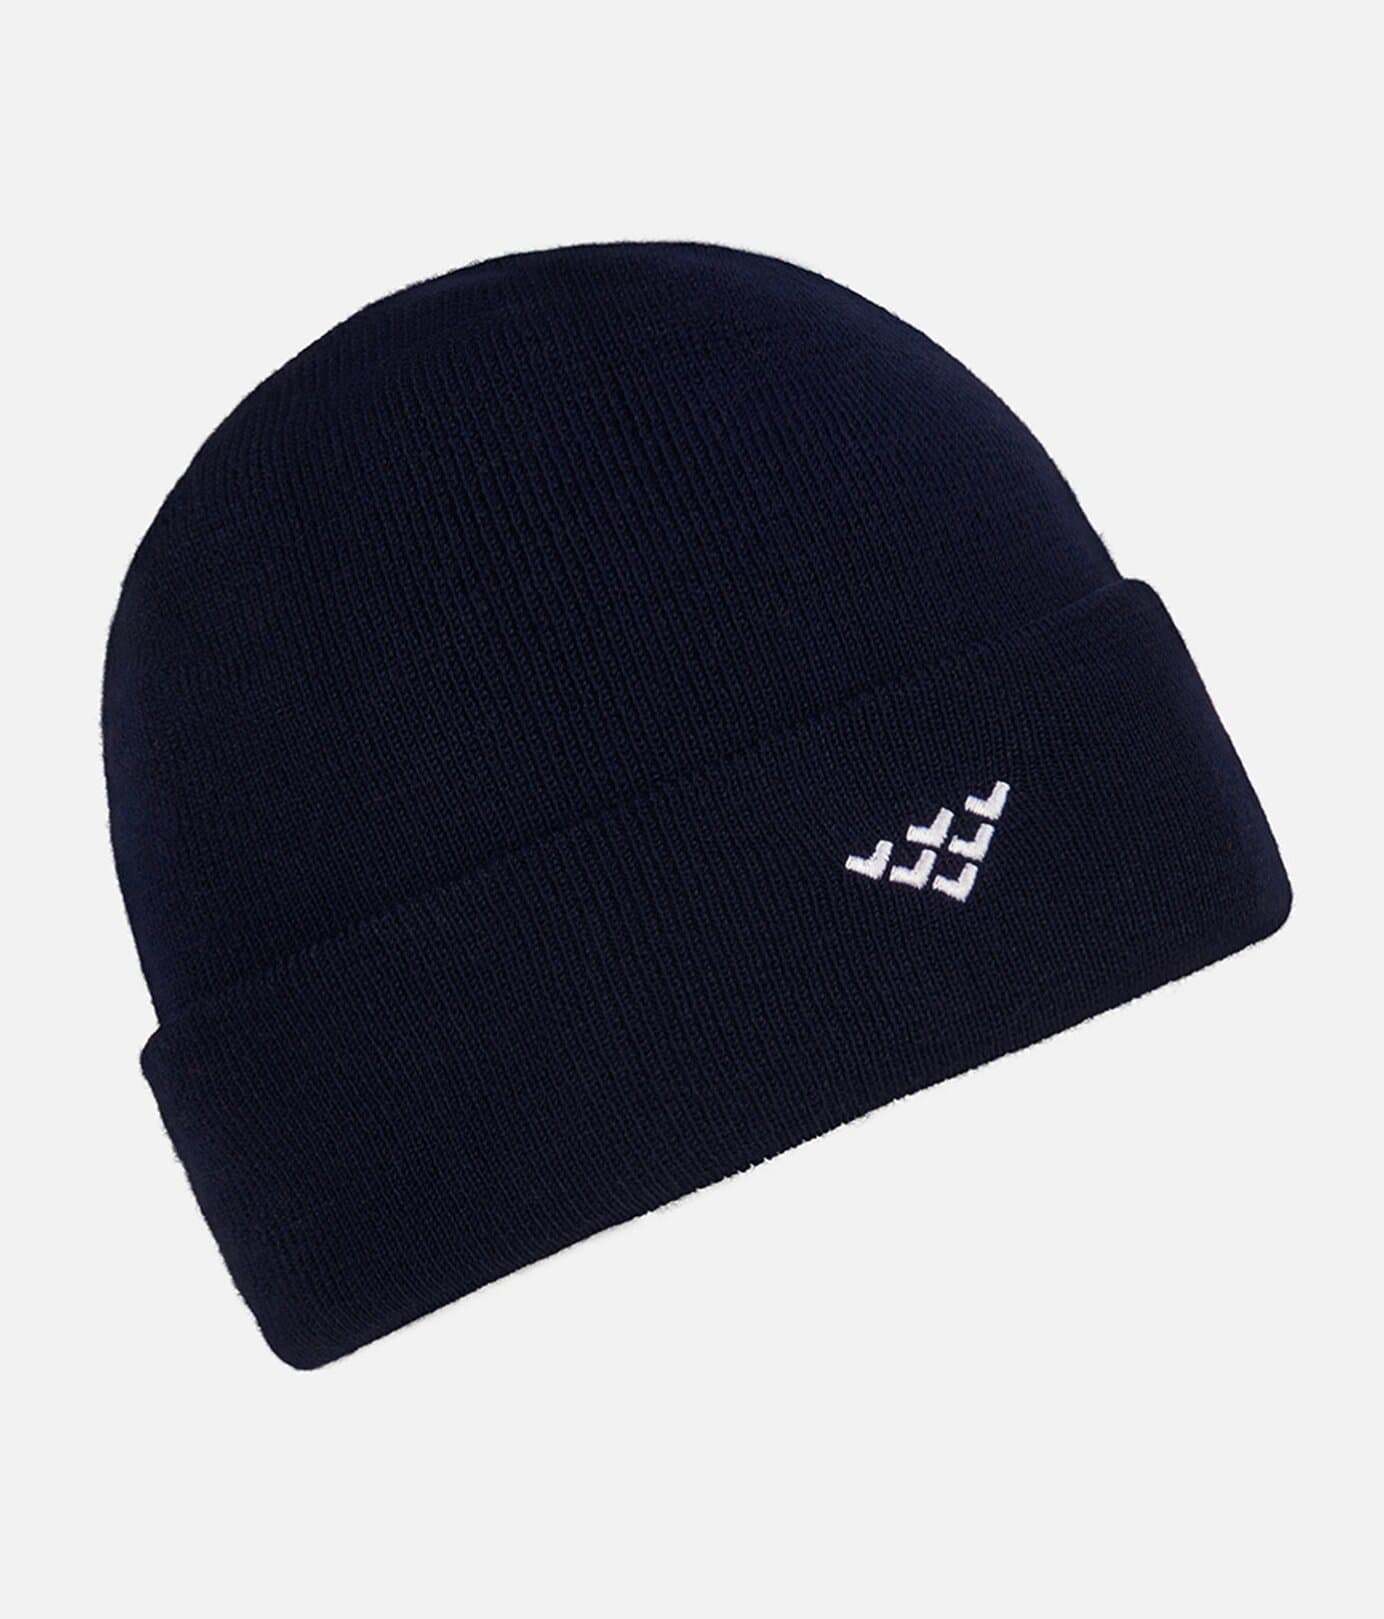 Compass Cuffed Beanie, Embroidery Winter Hat, Toque, Essential